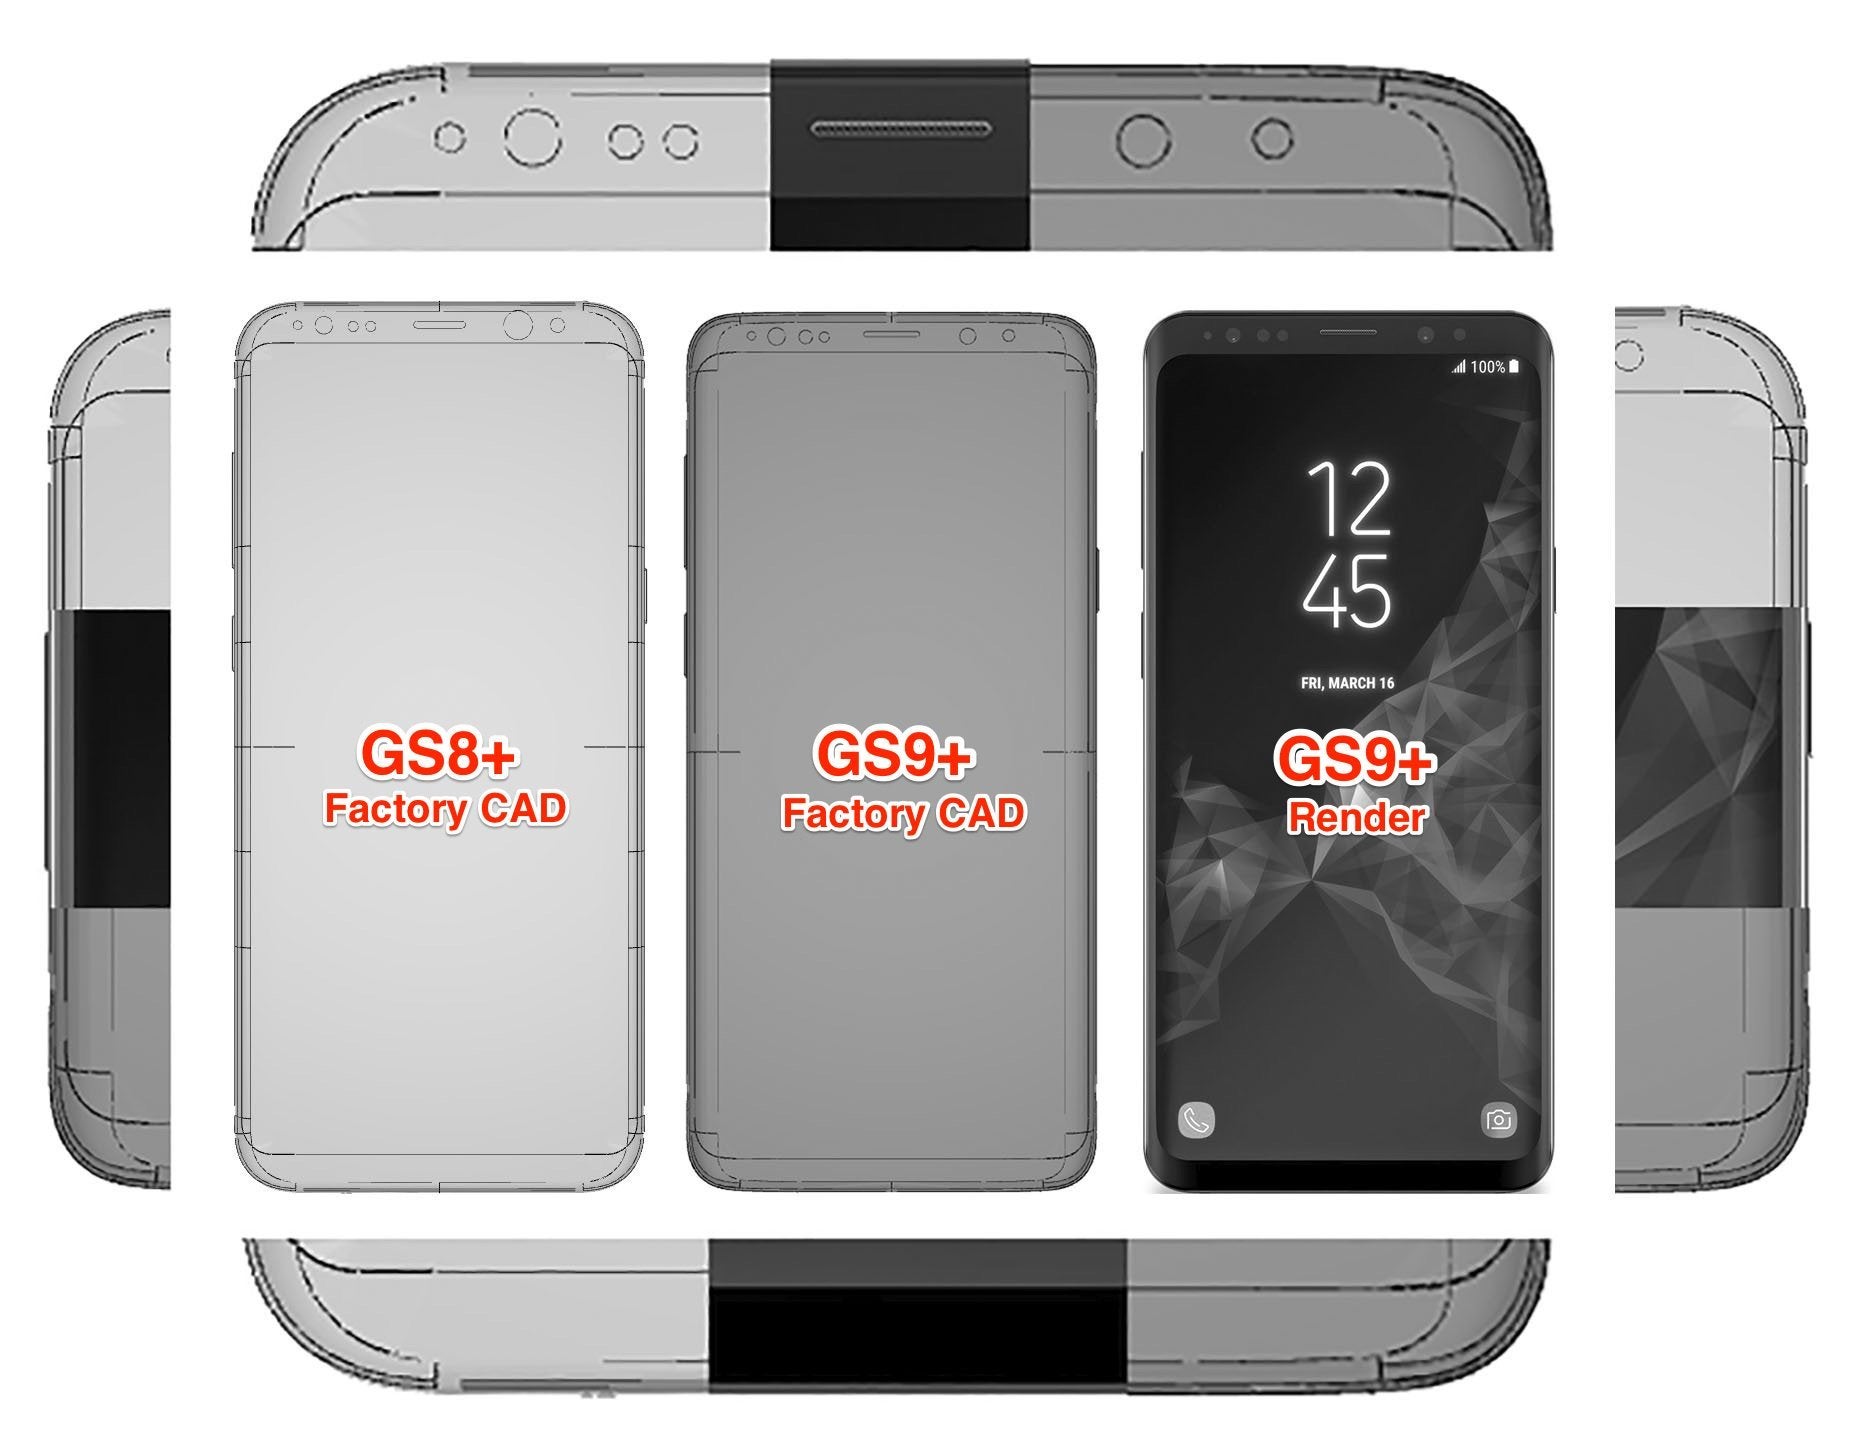 The S9 vs S8 edge curve slope might be more gradual, start and merge sooner with the thicker side bezels, for the joy of screen protector makers - Leaked Galaxy S9+ vs S8+ factory schematics solve the mystery of the thickening bezels